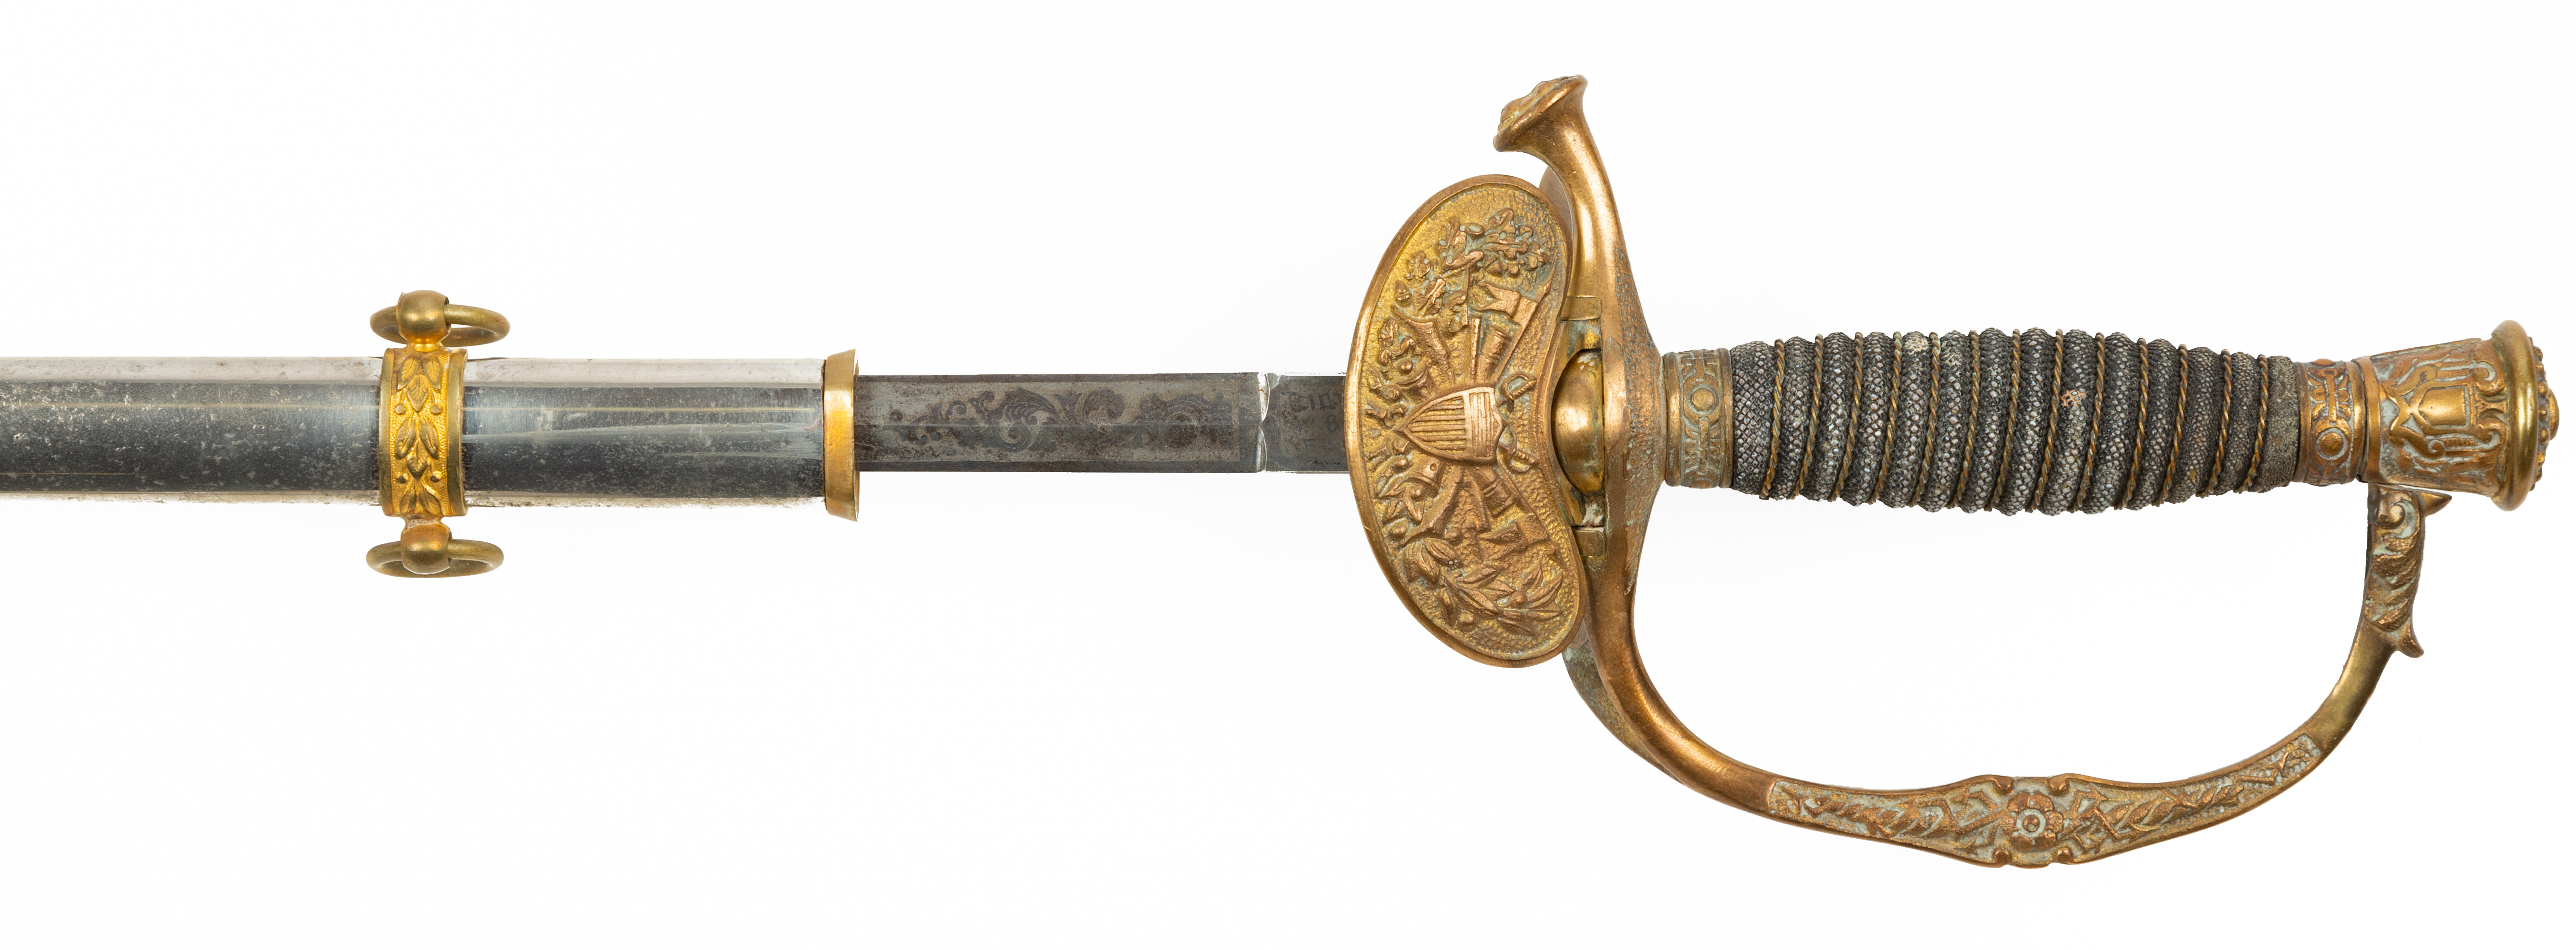 US INFANTRY SWORD 1870-1900 Small